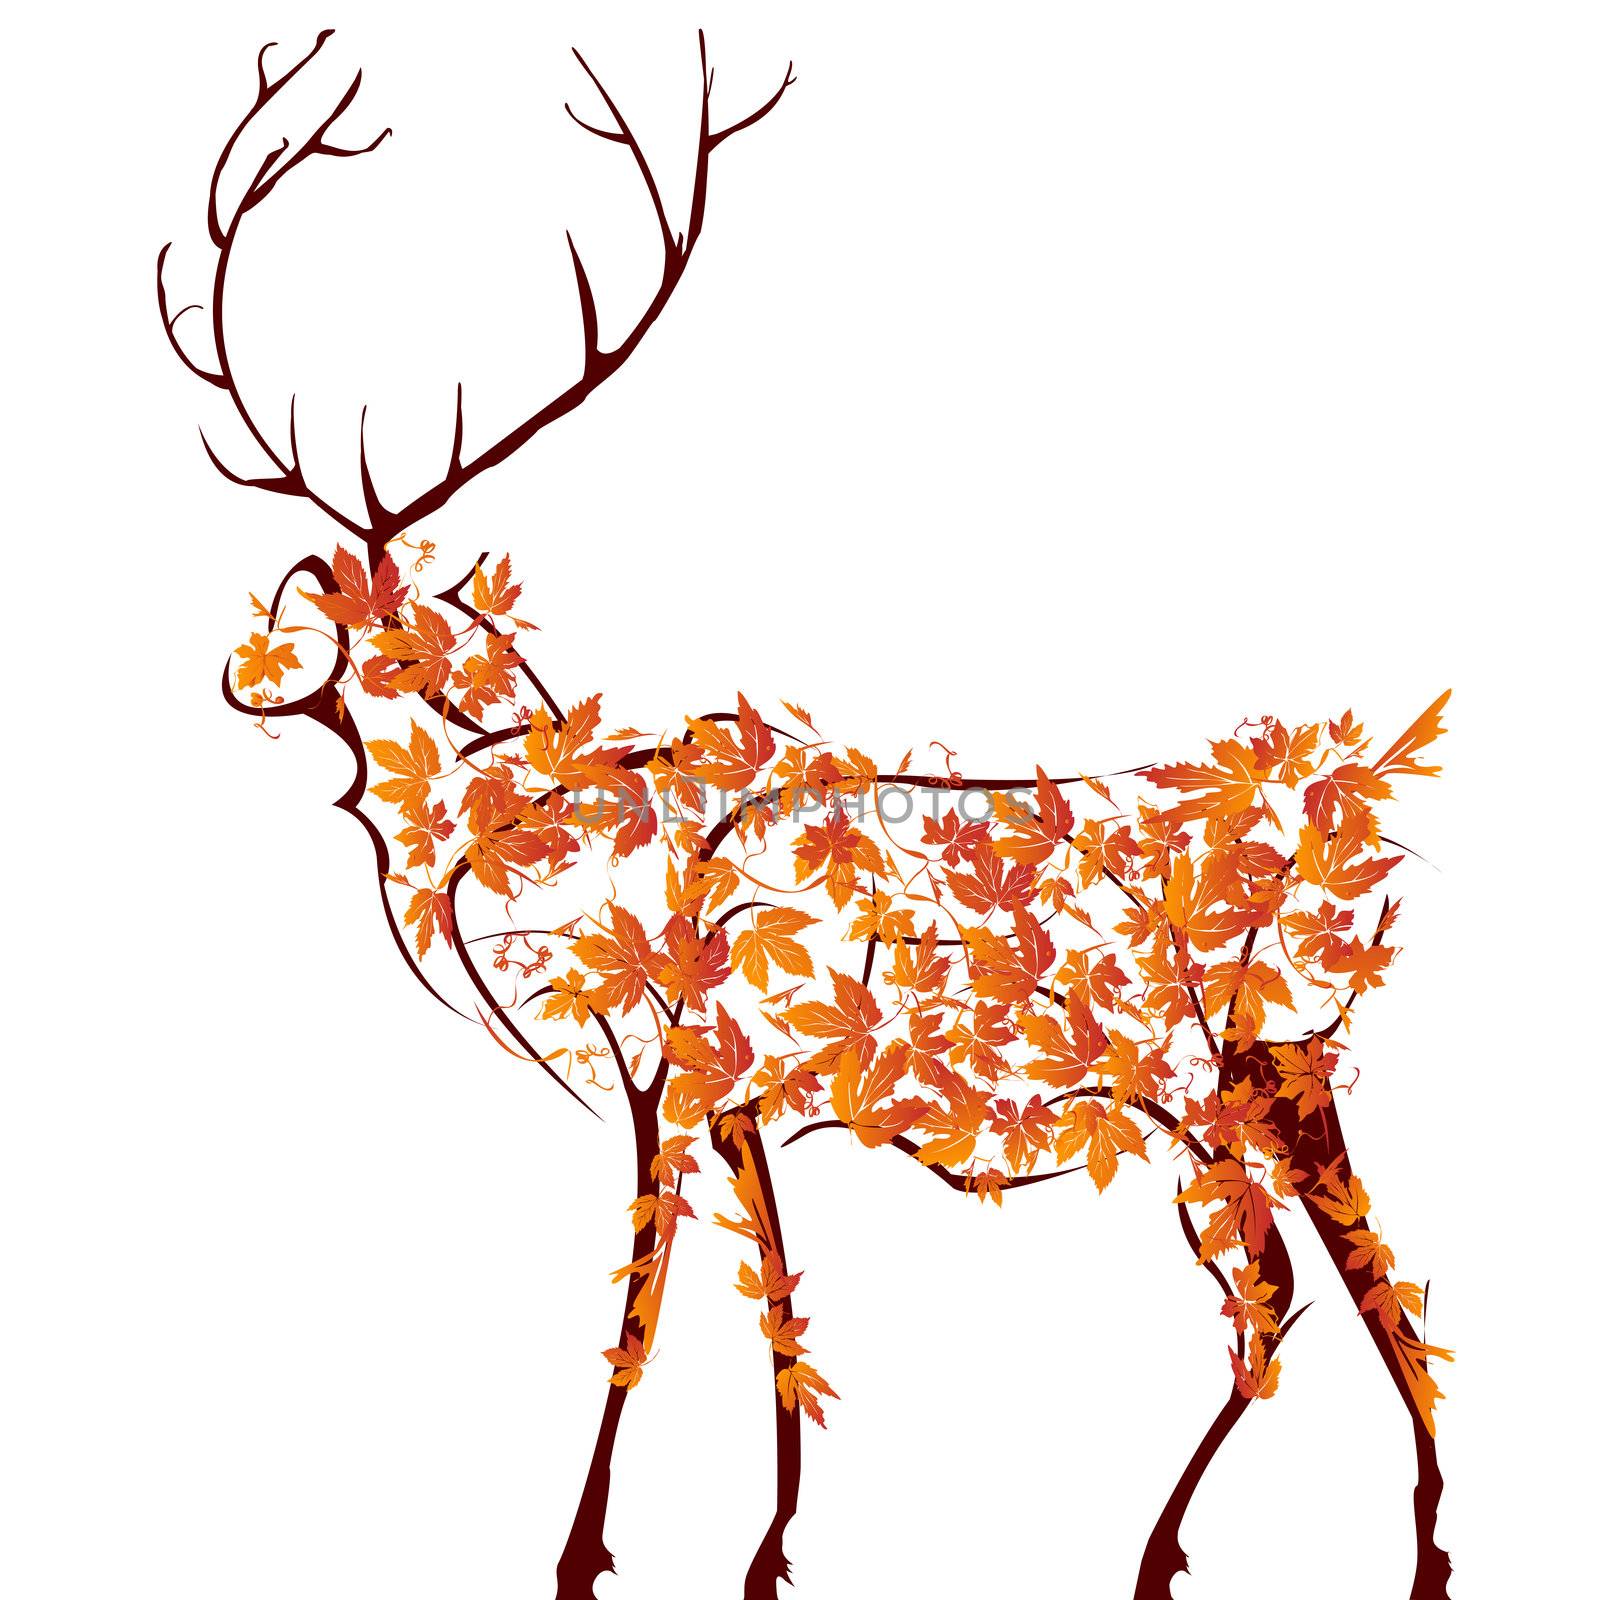 Sketch of a deer made from autumn leaves